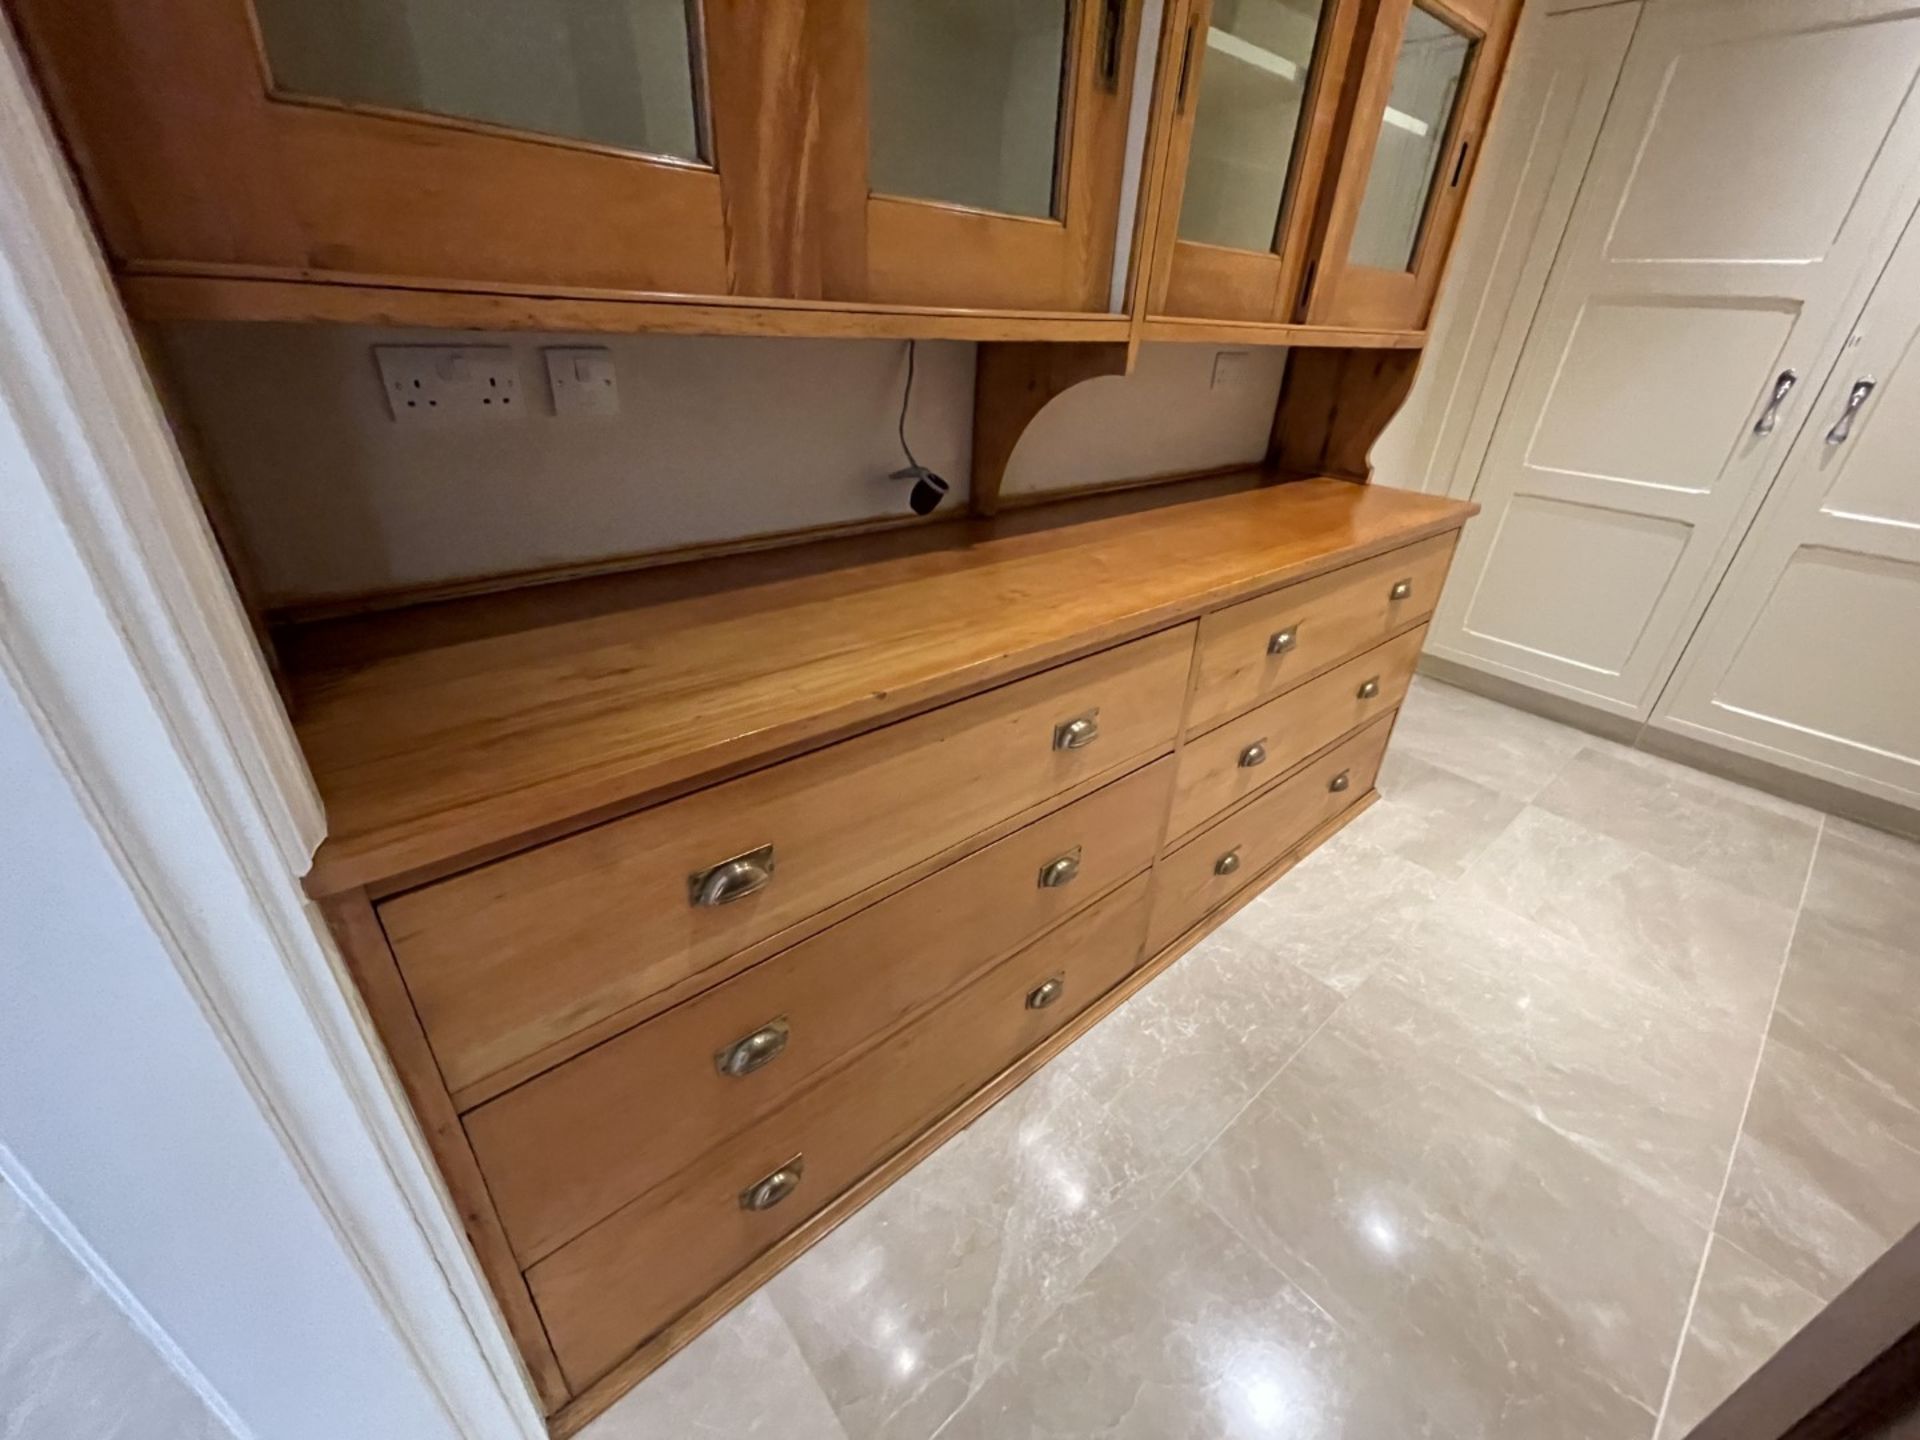 1 x Large 2-section Bespoke Solid Wood 2.5-Metre Tall 4-Door, 6-Drawer Fitted Dresser - Image 5 of 39